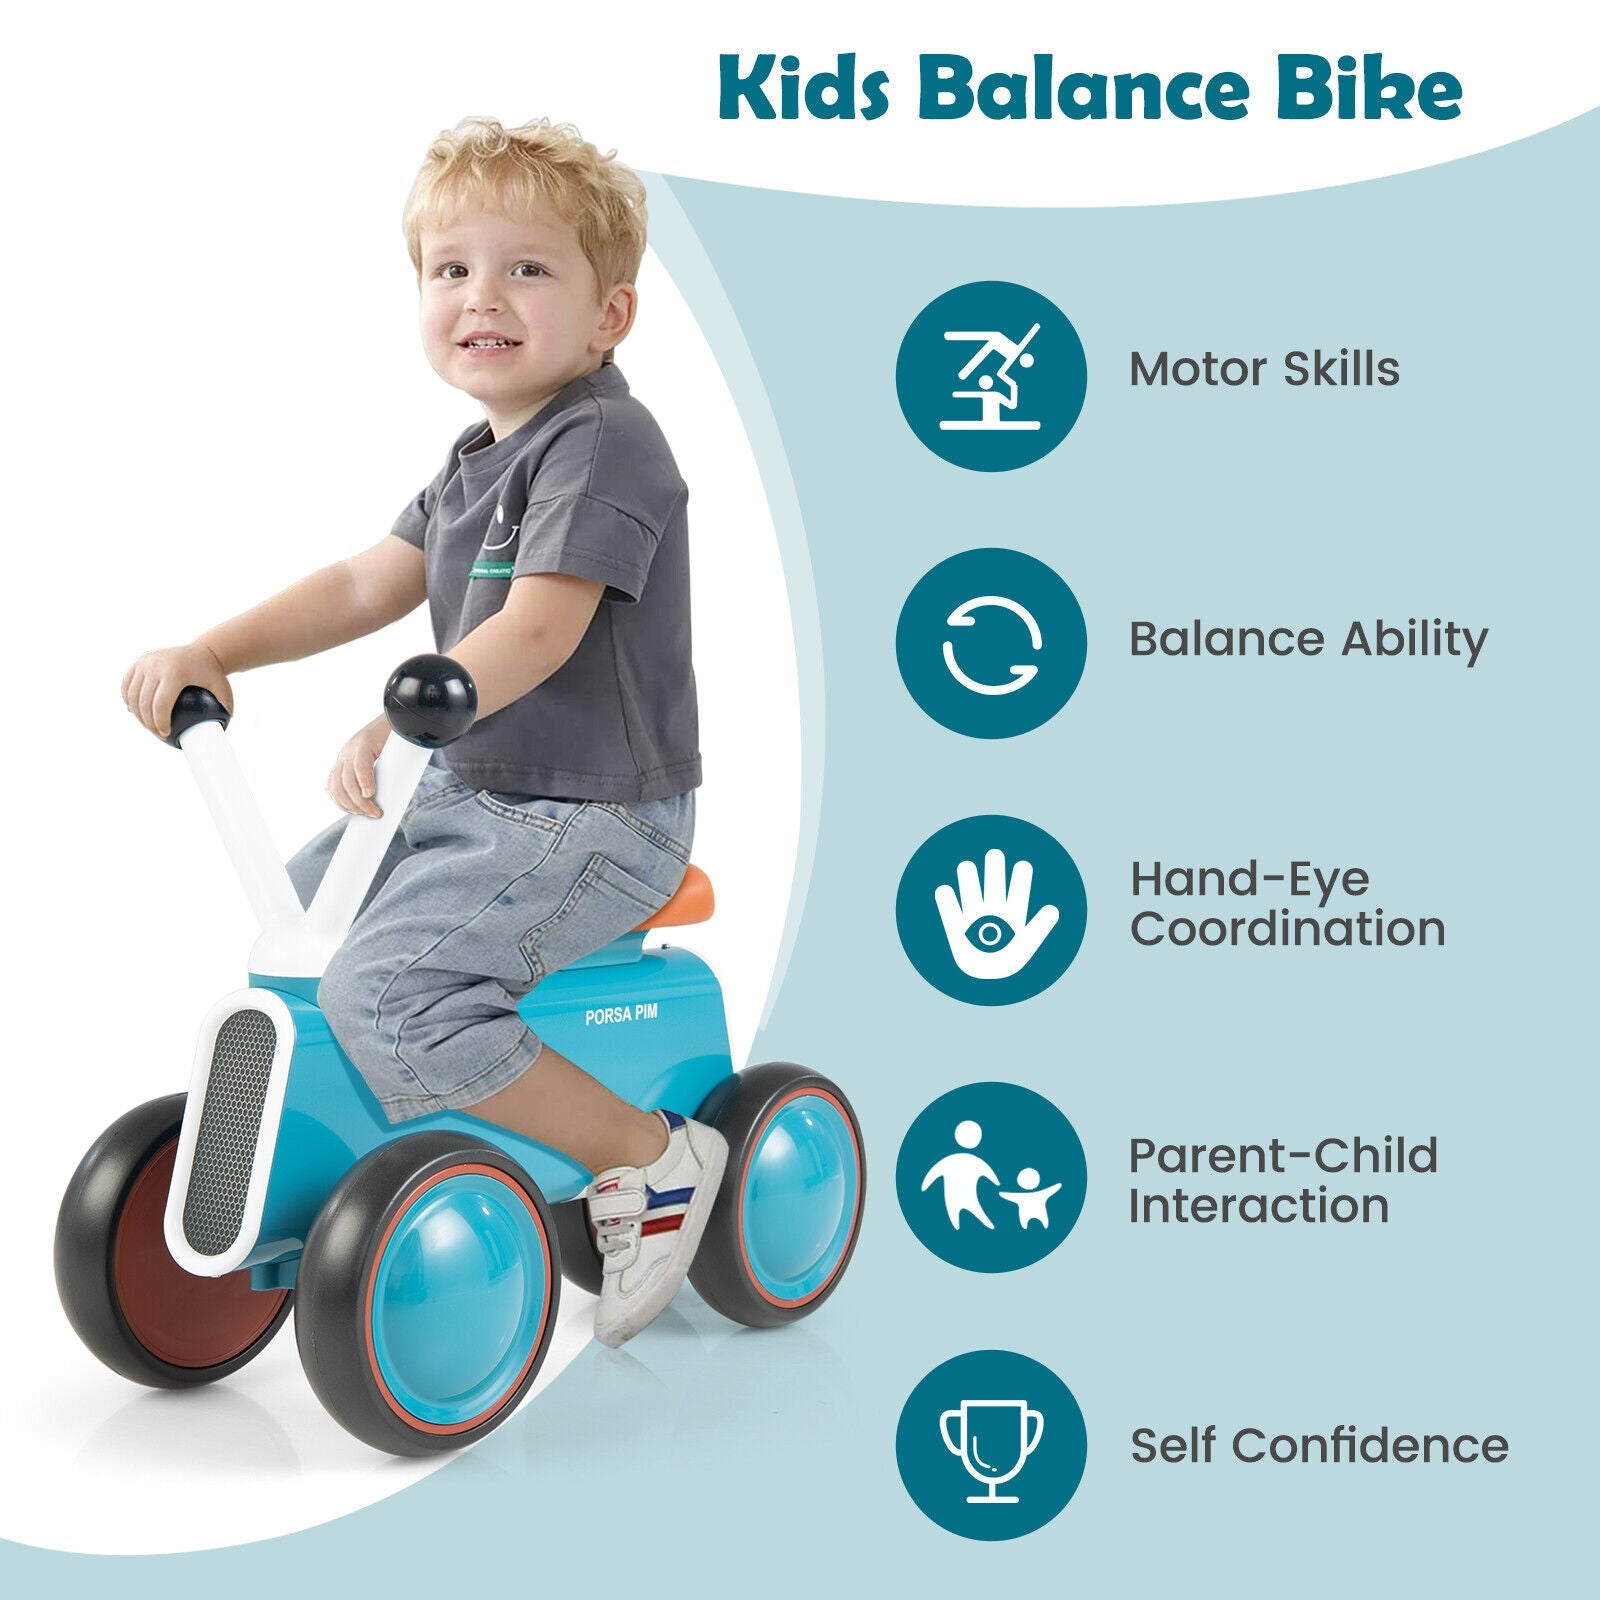 4 Wheels Baby Balance Bike without Pedal - Gallery Canada